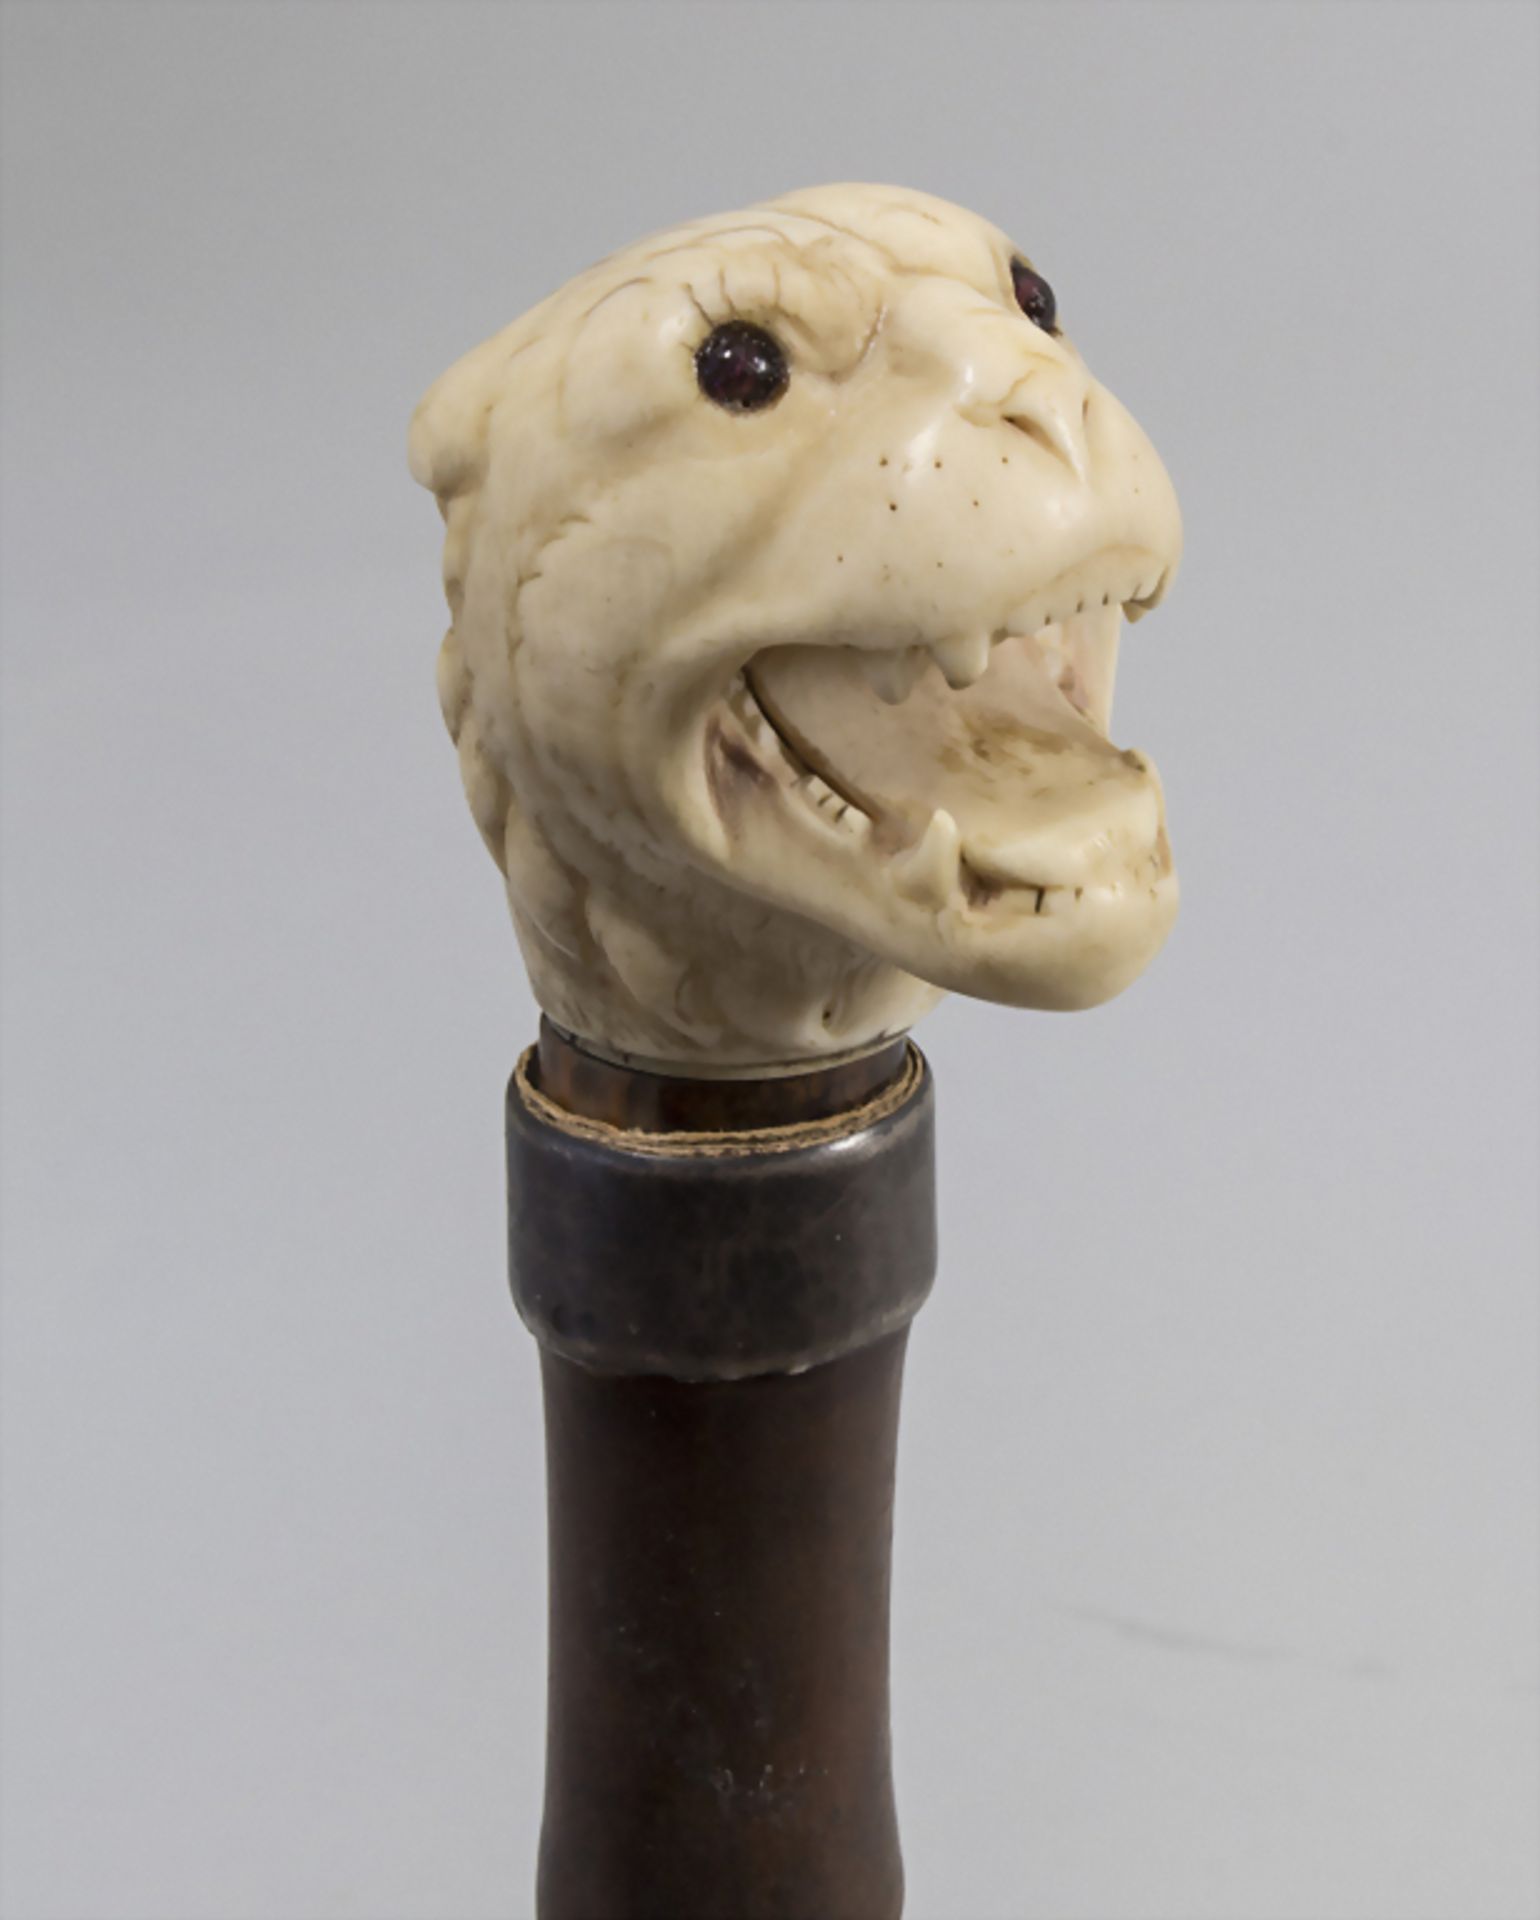 Gehstock mit Elfenbeingriff 'Panther' / A cane with ivory handle 'panther', um 1880Mat